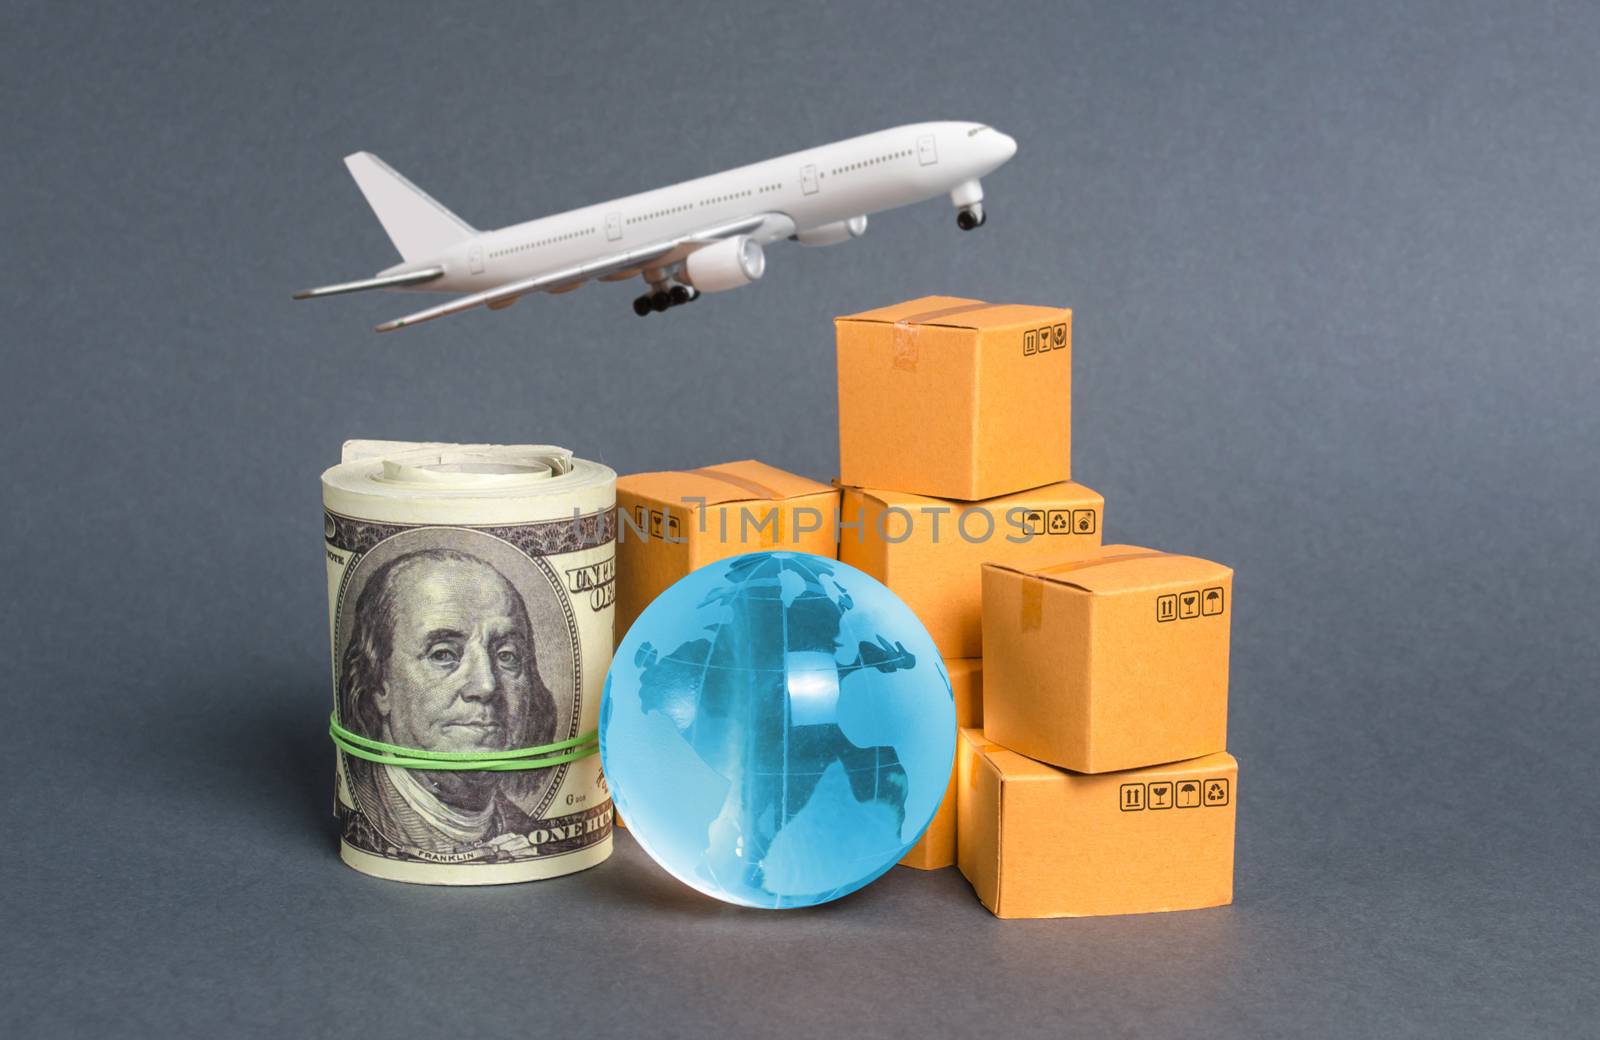 A stack of boxes, airplane a bundle of dollars and a blue planet earth globe. World trade and commodity exchange. commerce traffic trading balance. Import, export, transit of products.